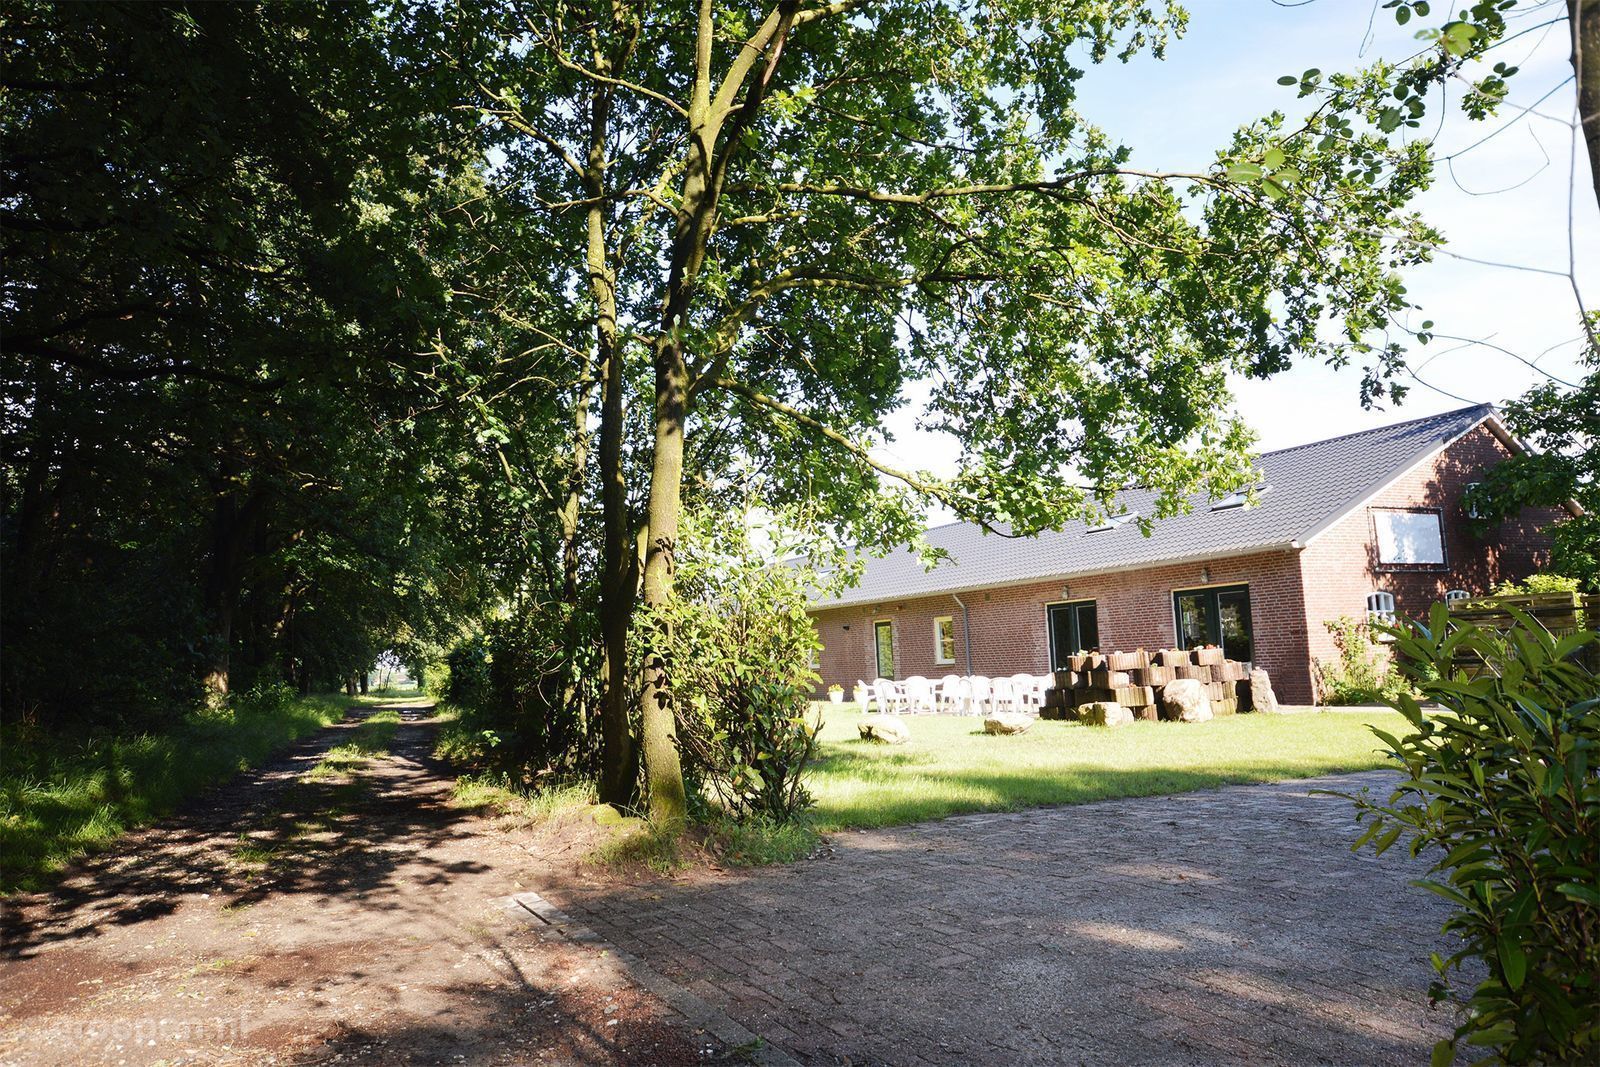 Group accommodation Odiliapeel